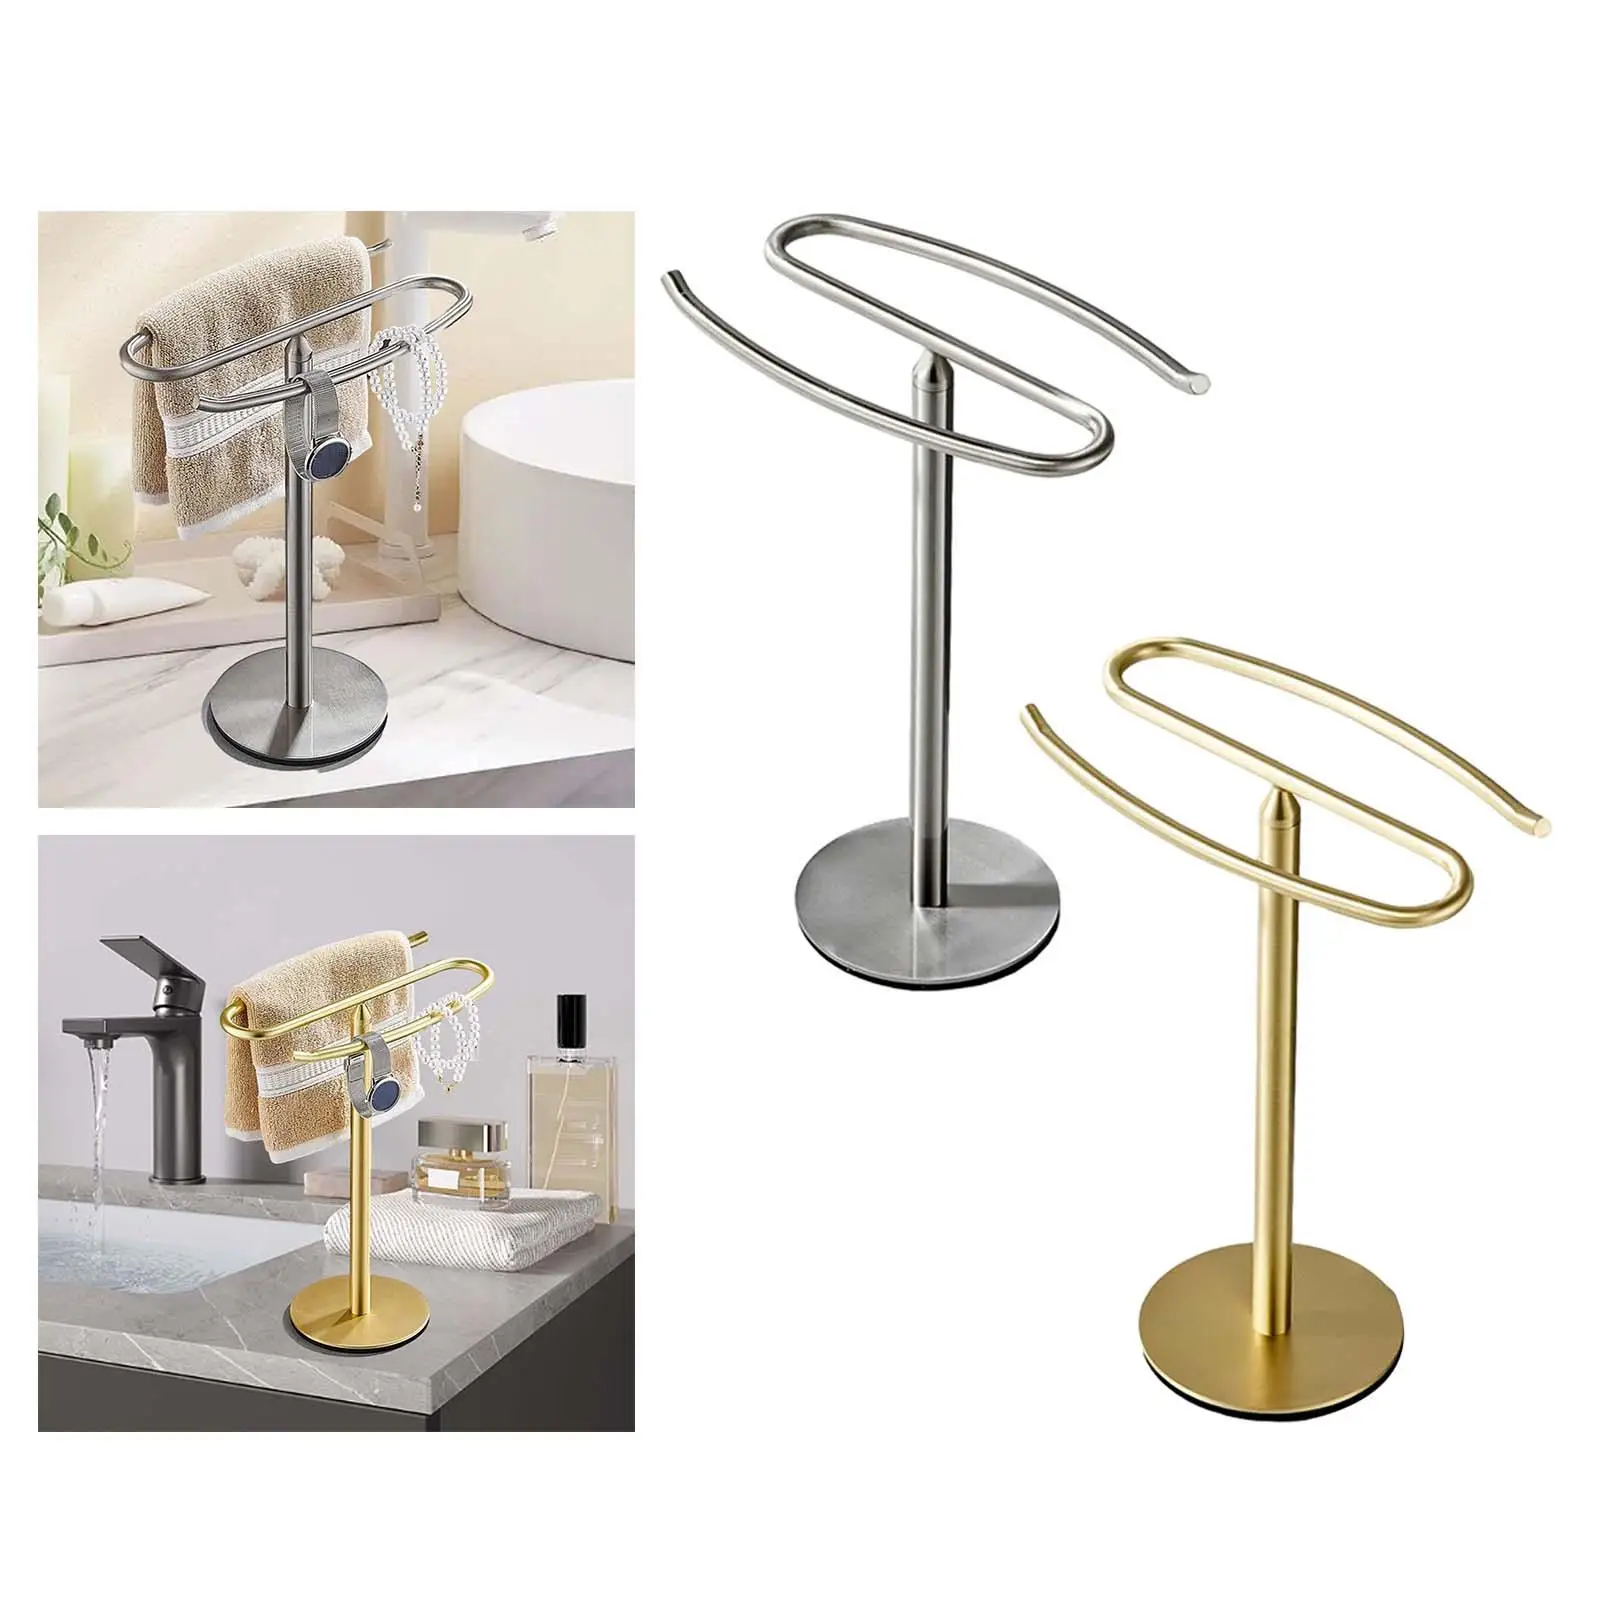 Hand Towel Stand Watch Holder Multifunctional for Dressing Tables